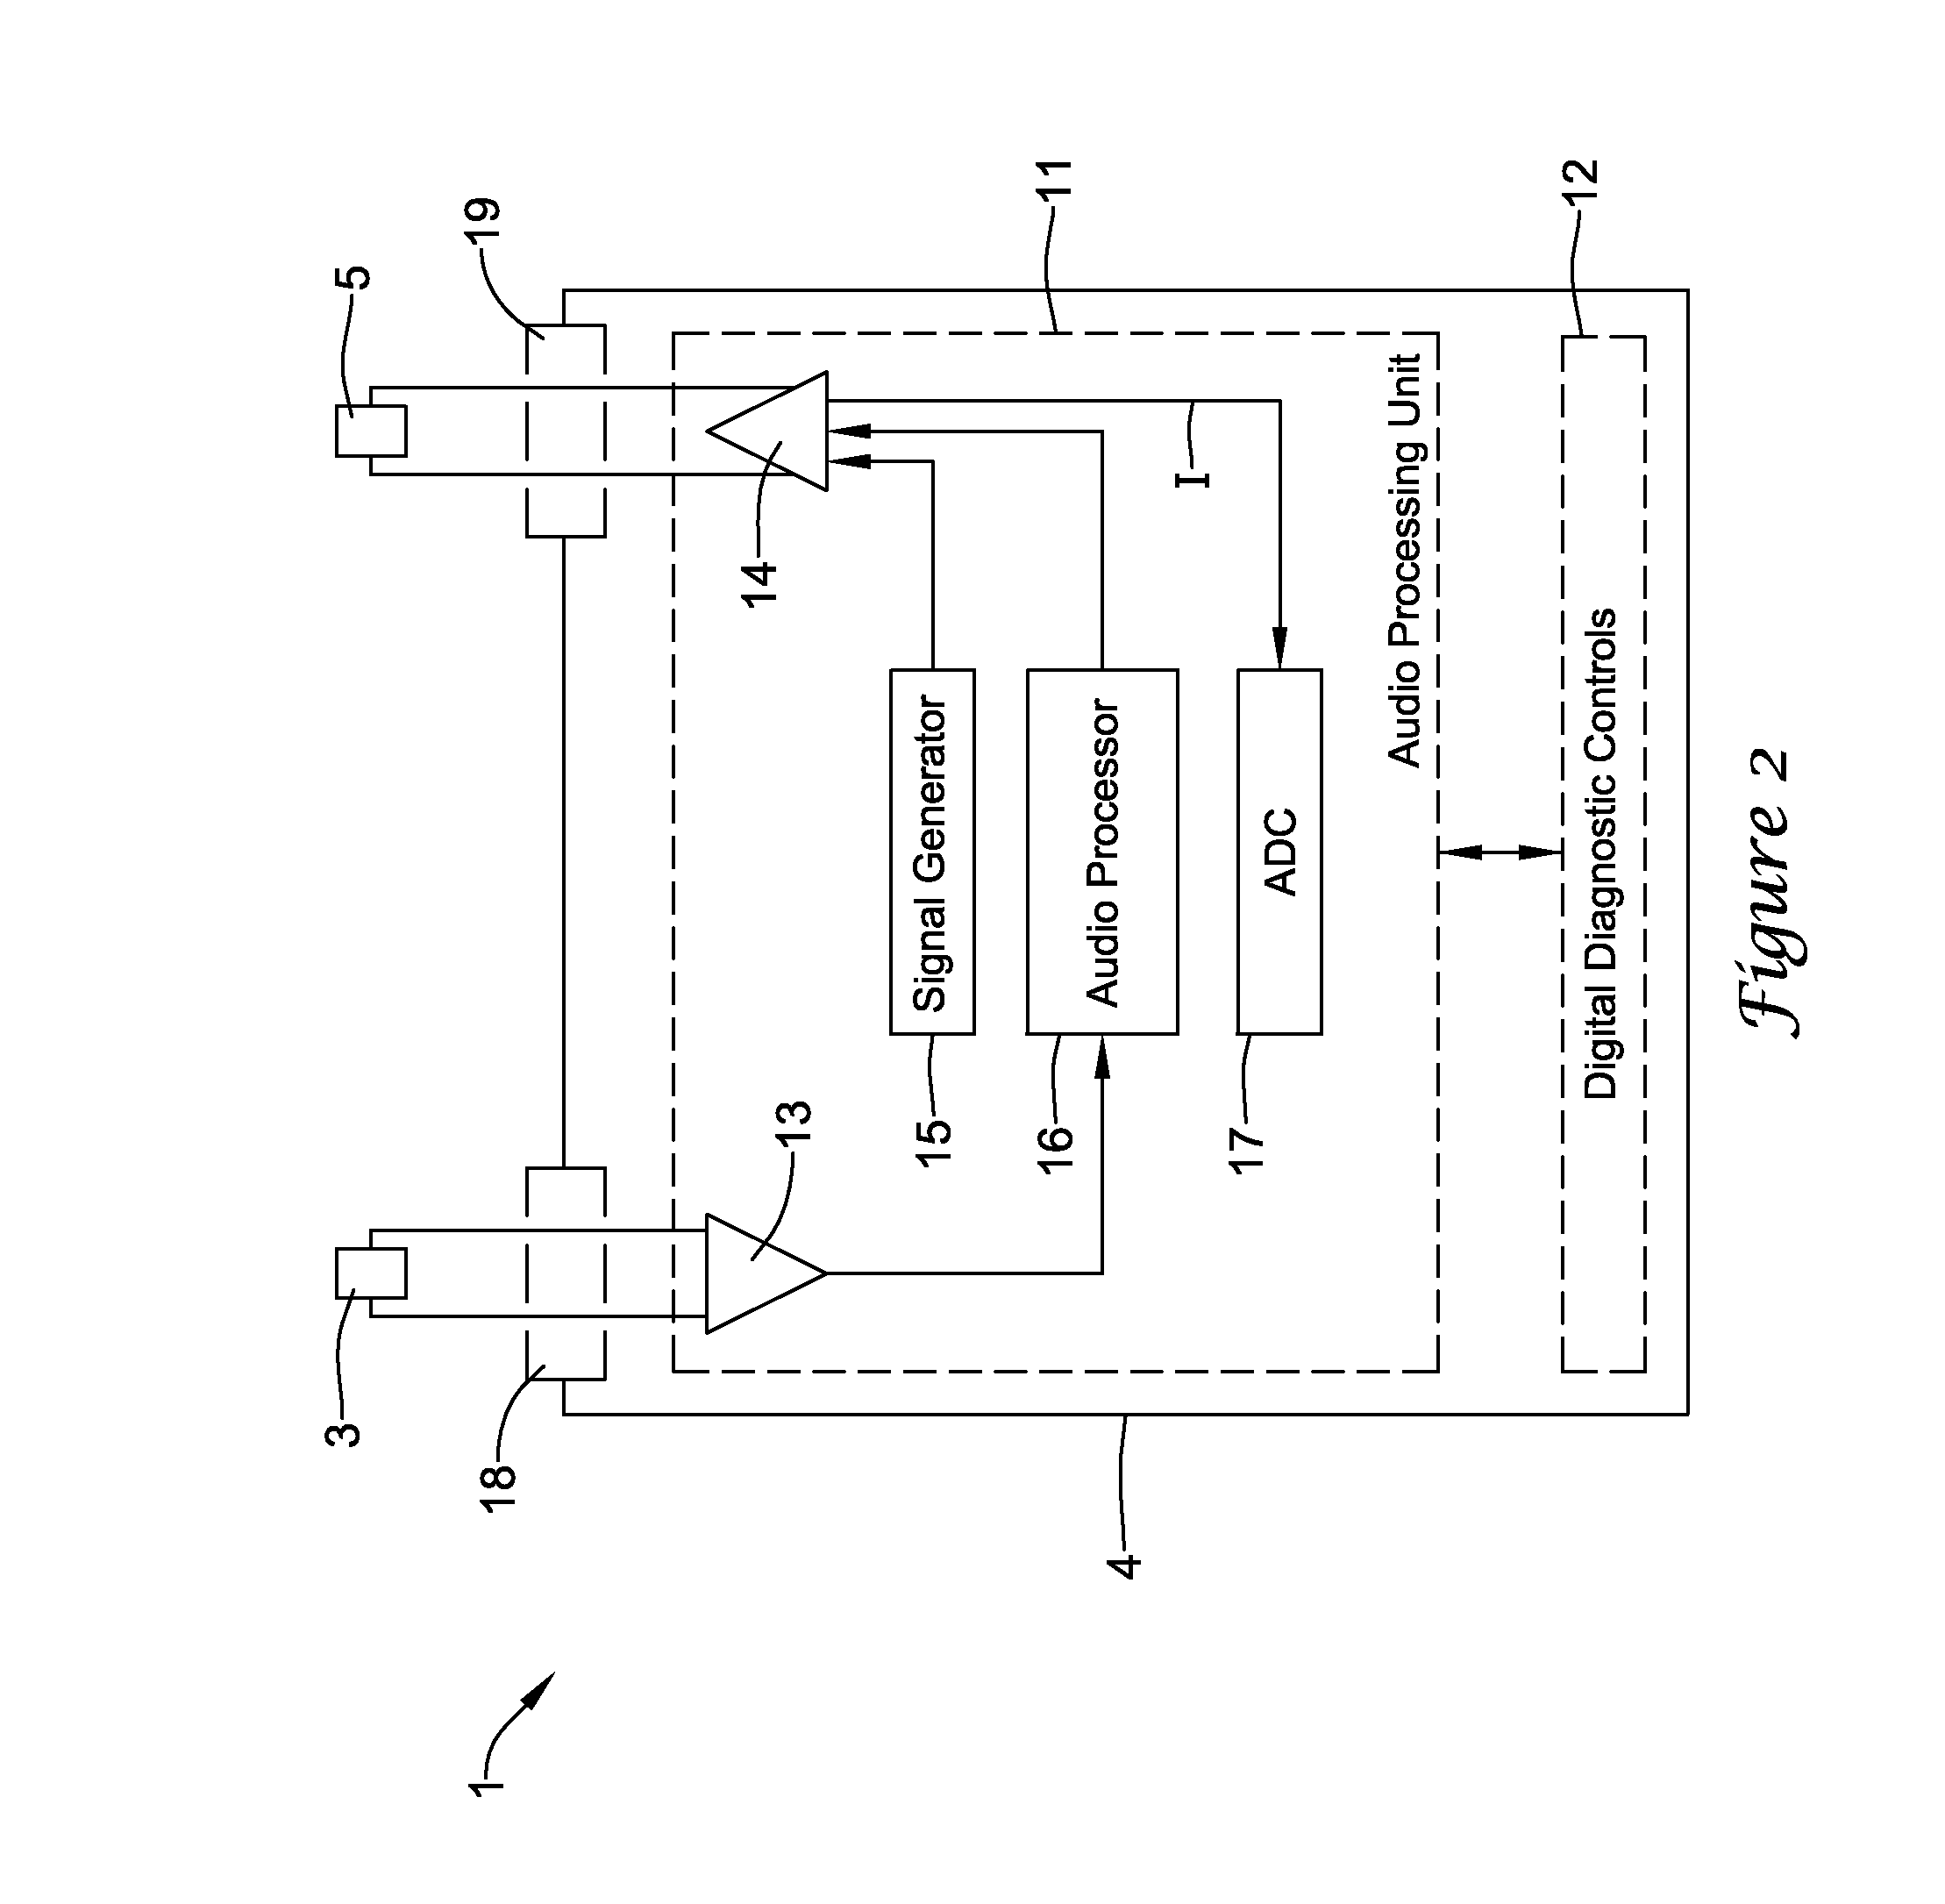 Transducer impedance measurement for hearing aid